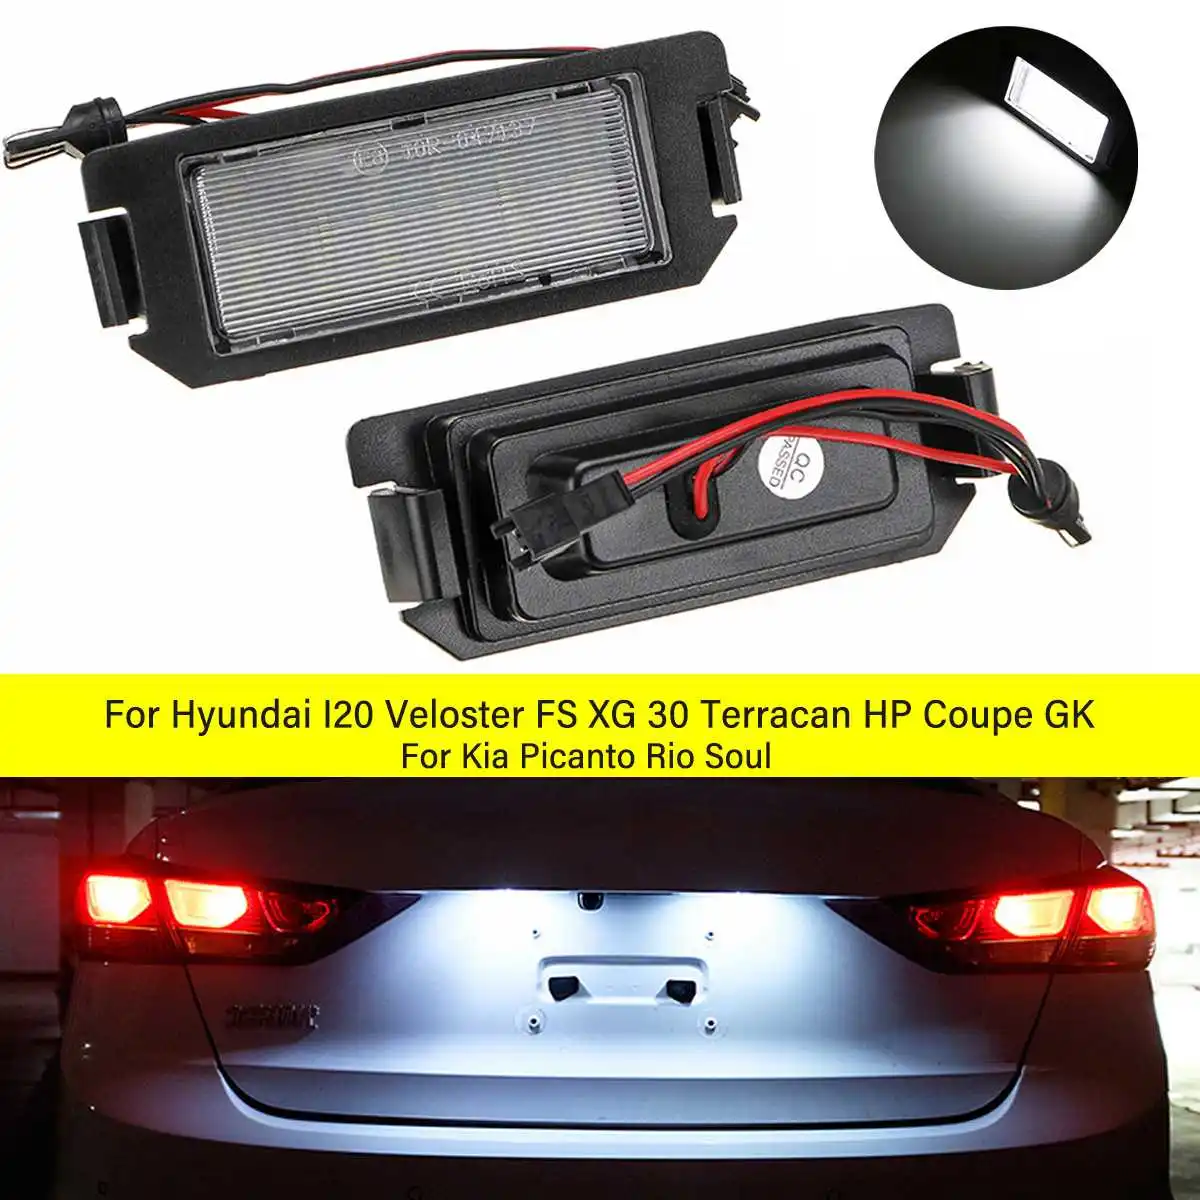 

2Pcs LED Number License Plate Light No error For Hyundai I20 I10 Veloster FS XG30 Terracan HP Coupe GK For Kia Picanto Rio Soul